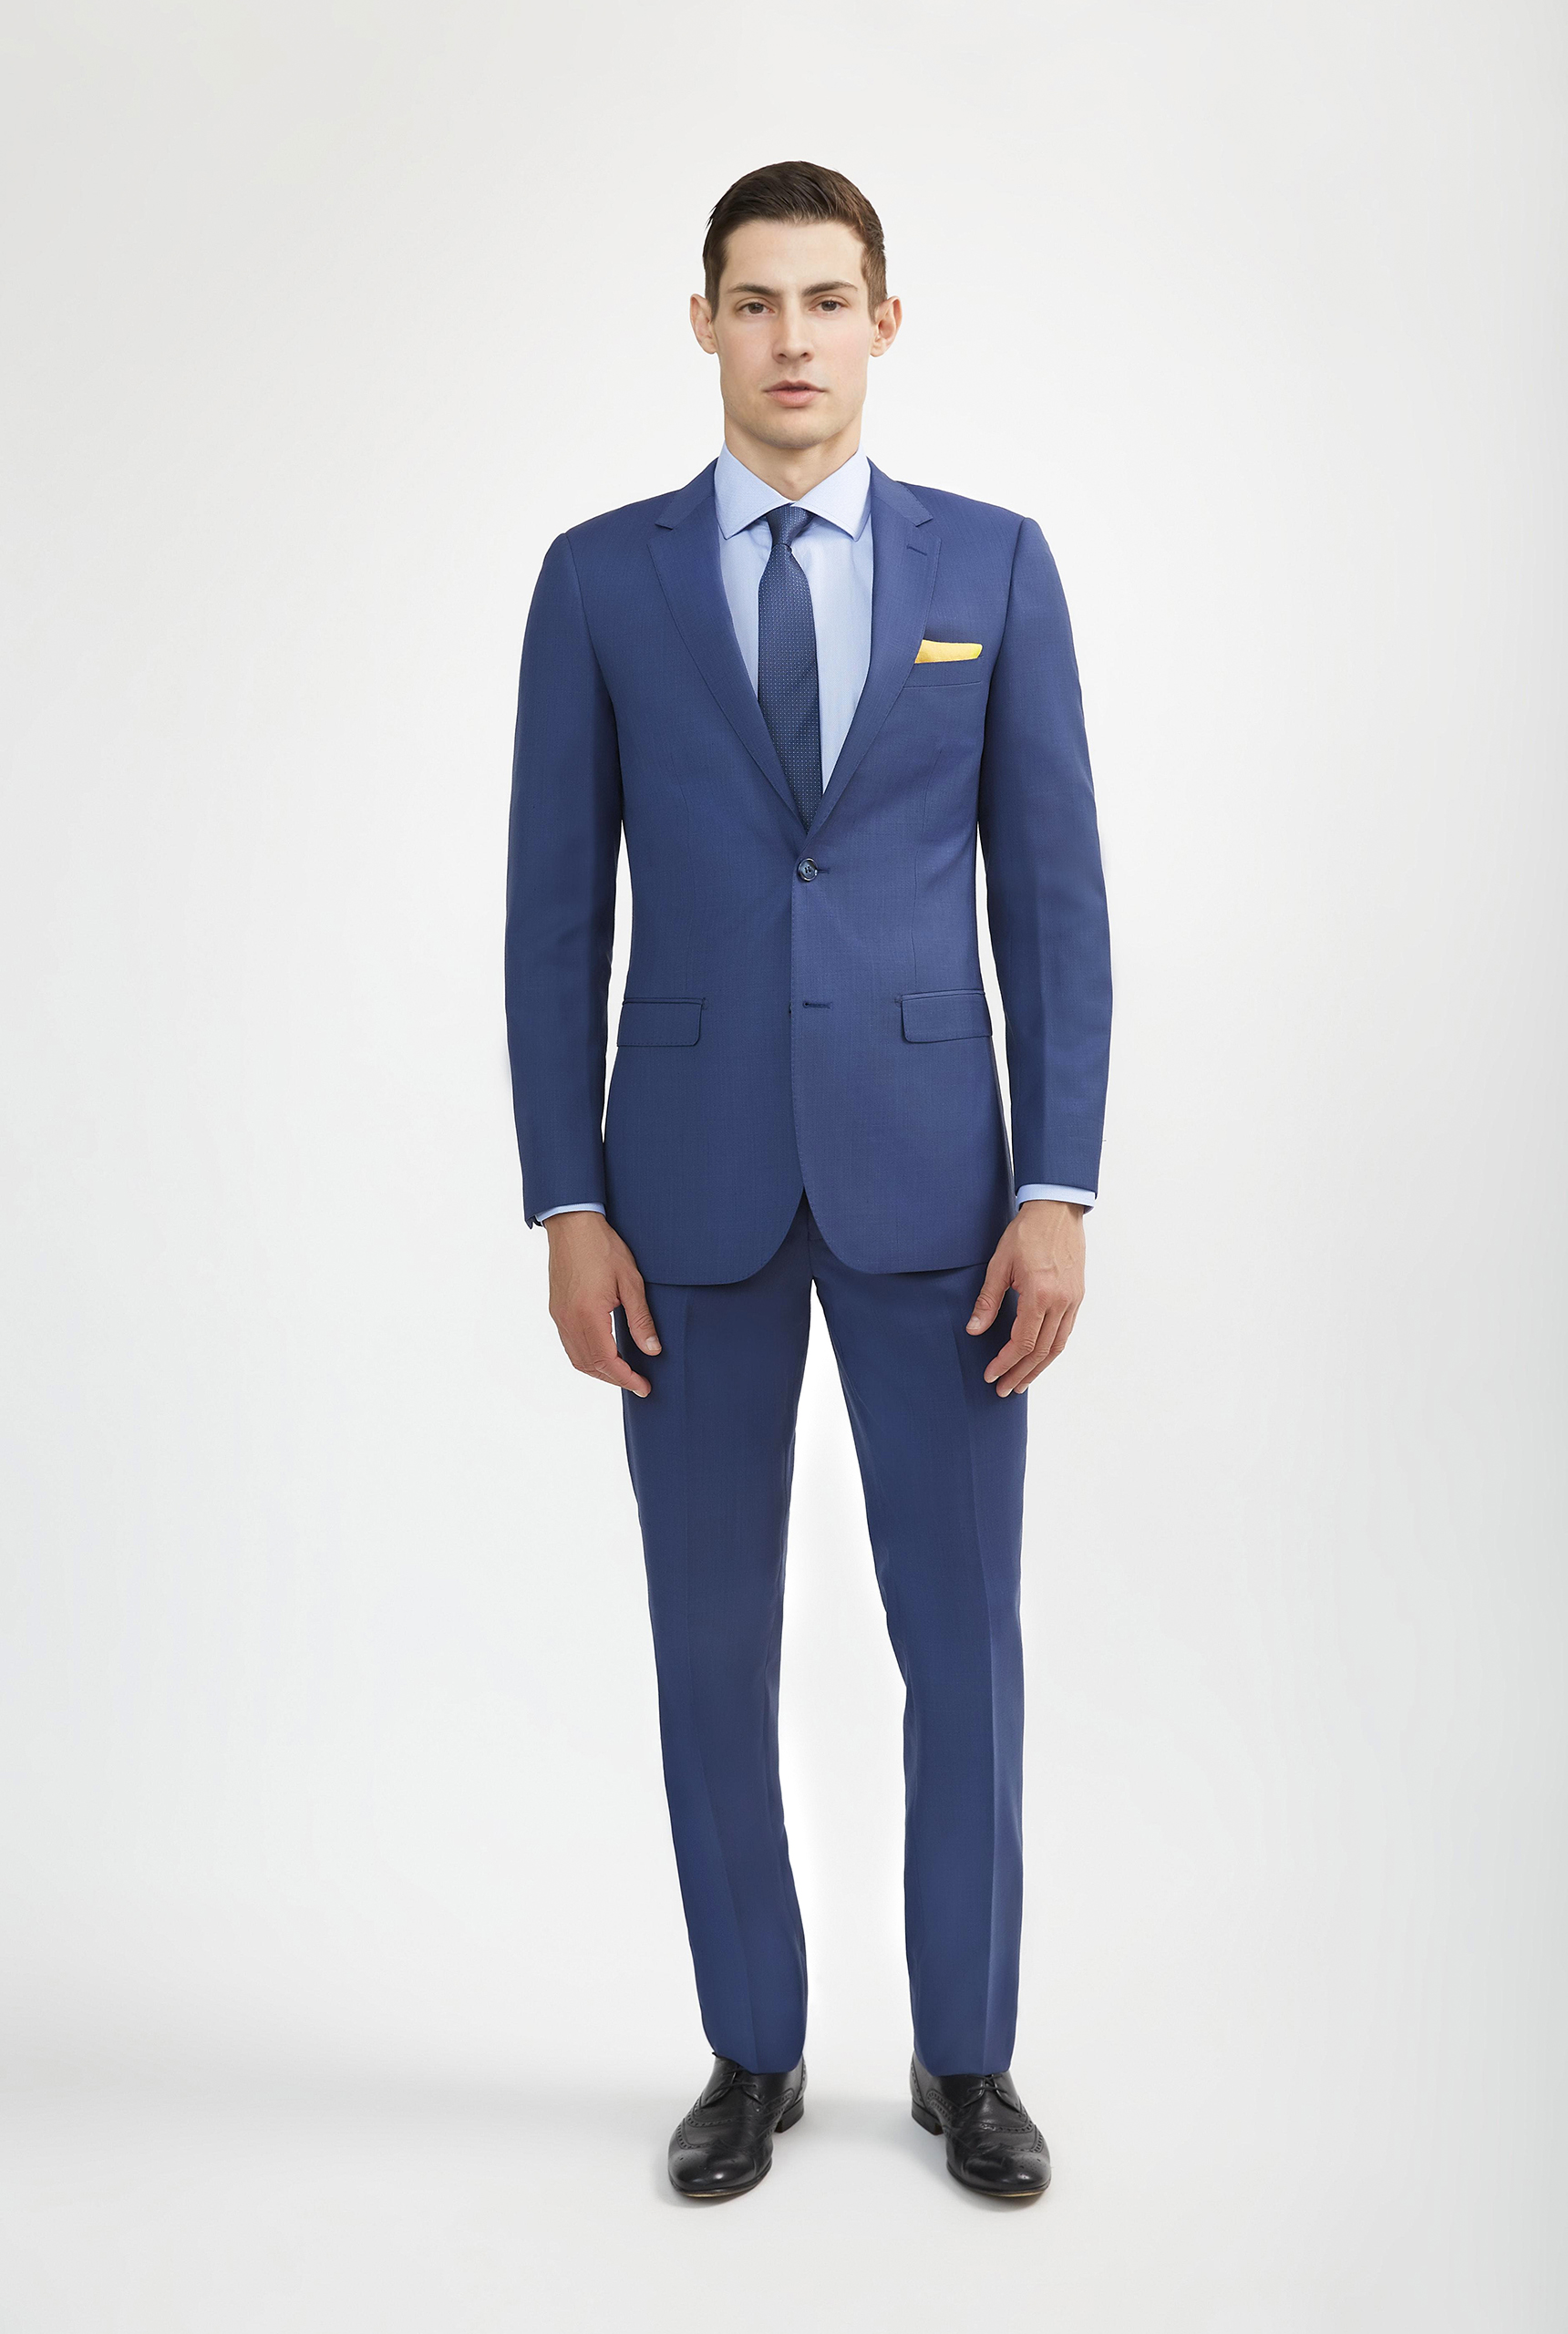 https://nyctuxedos.com/wp-content/uploads/adoro-deluxe-italian-wool-notch-lapel-royal-blue-suit.jpg